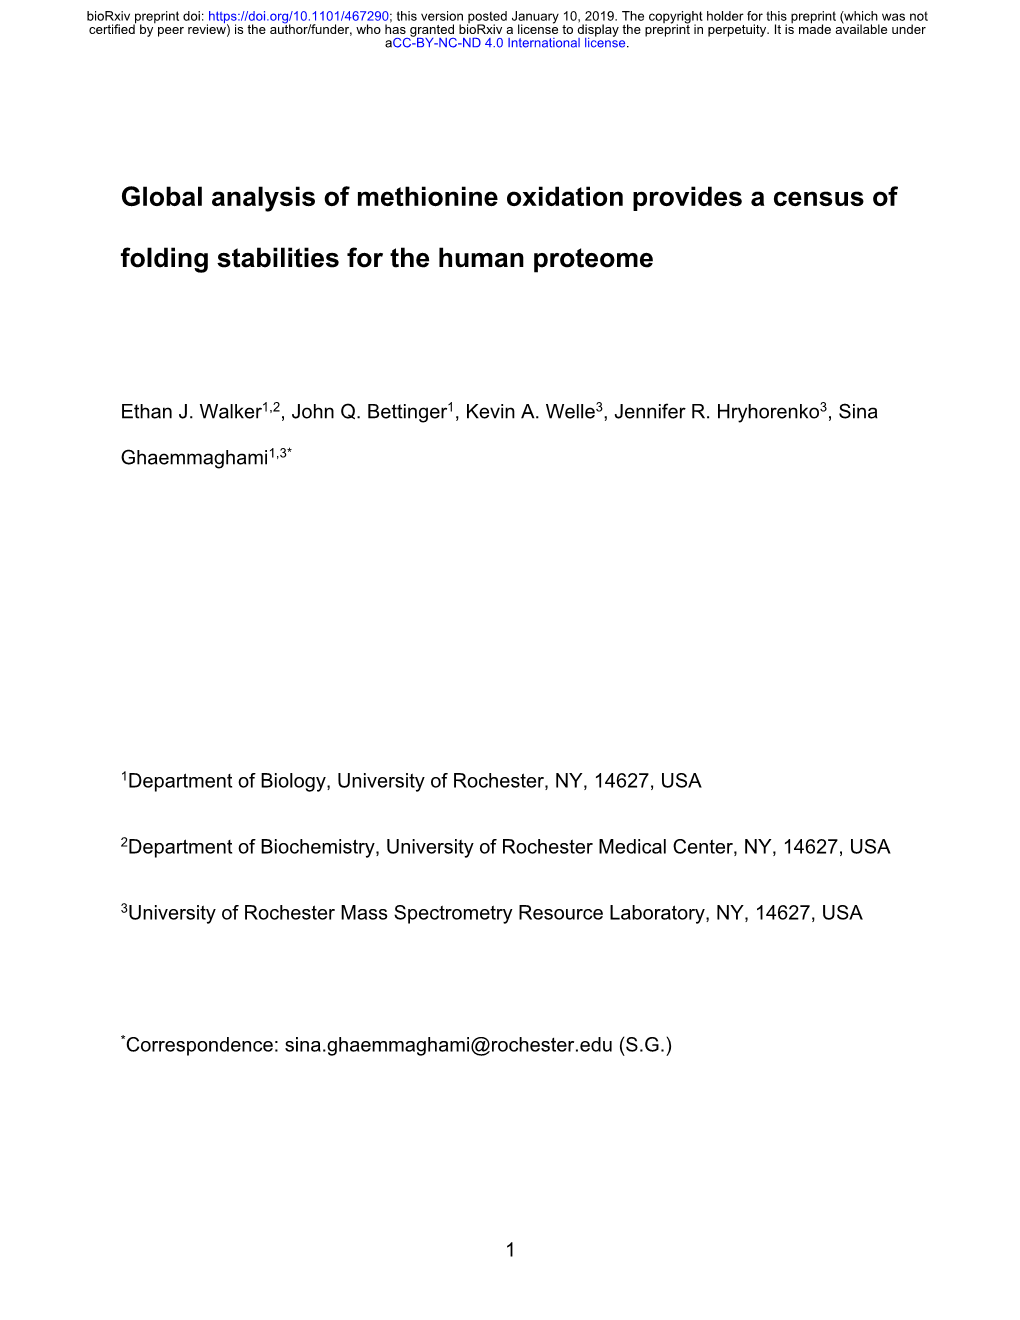 Global Analysis of Methionine Oxidation Provides a Census Of